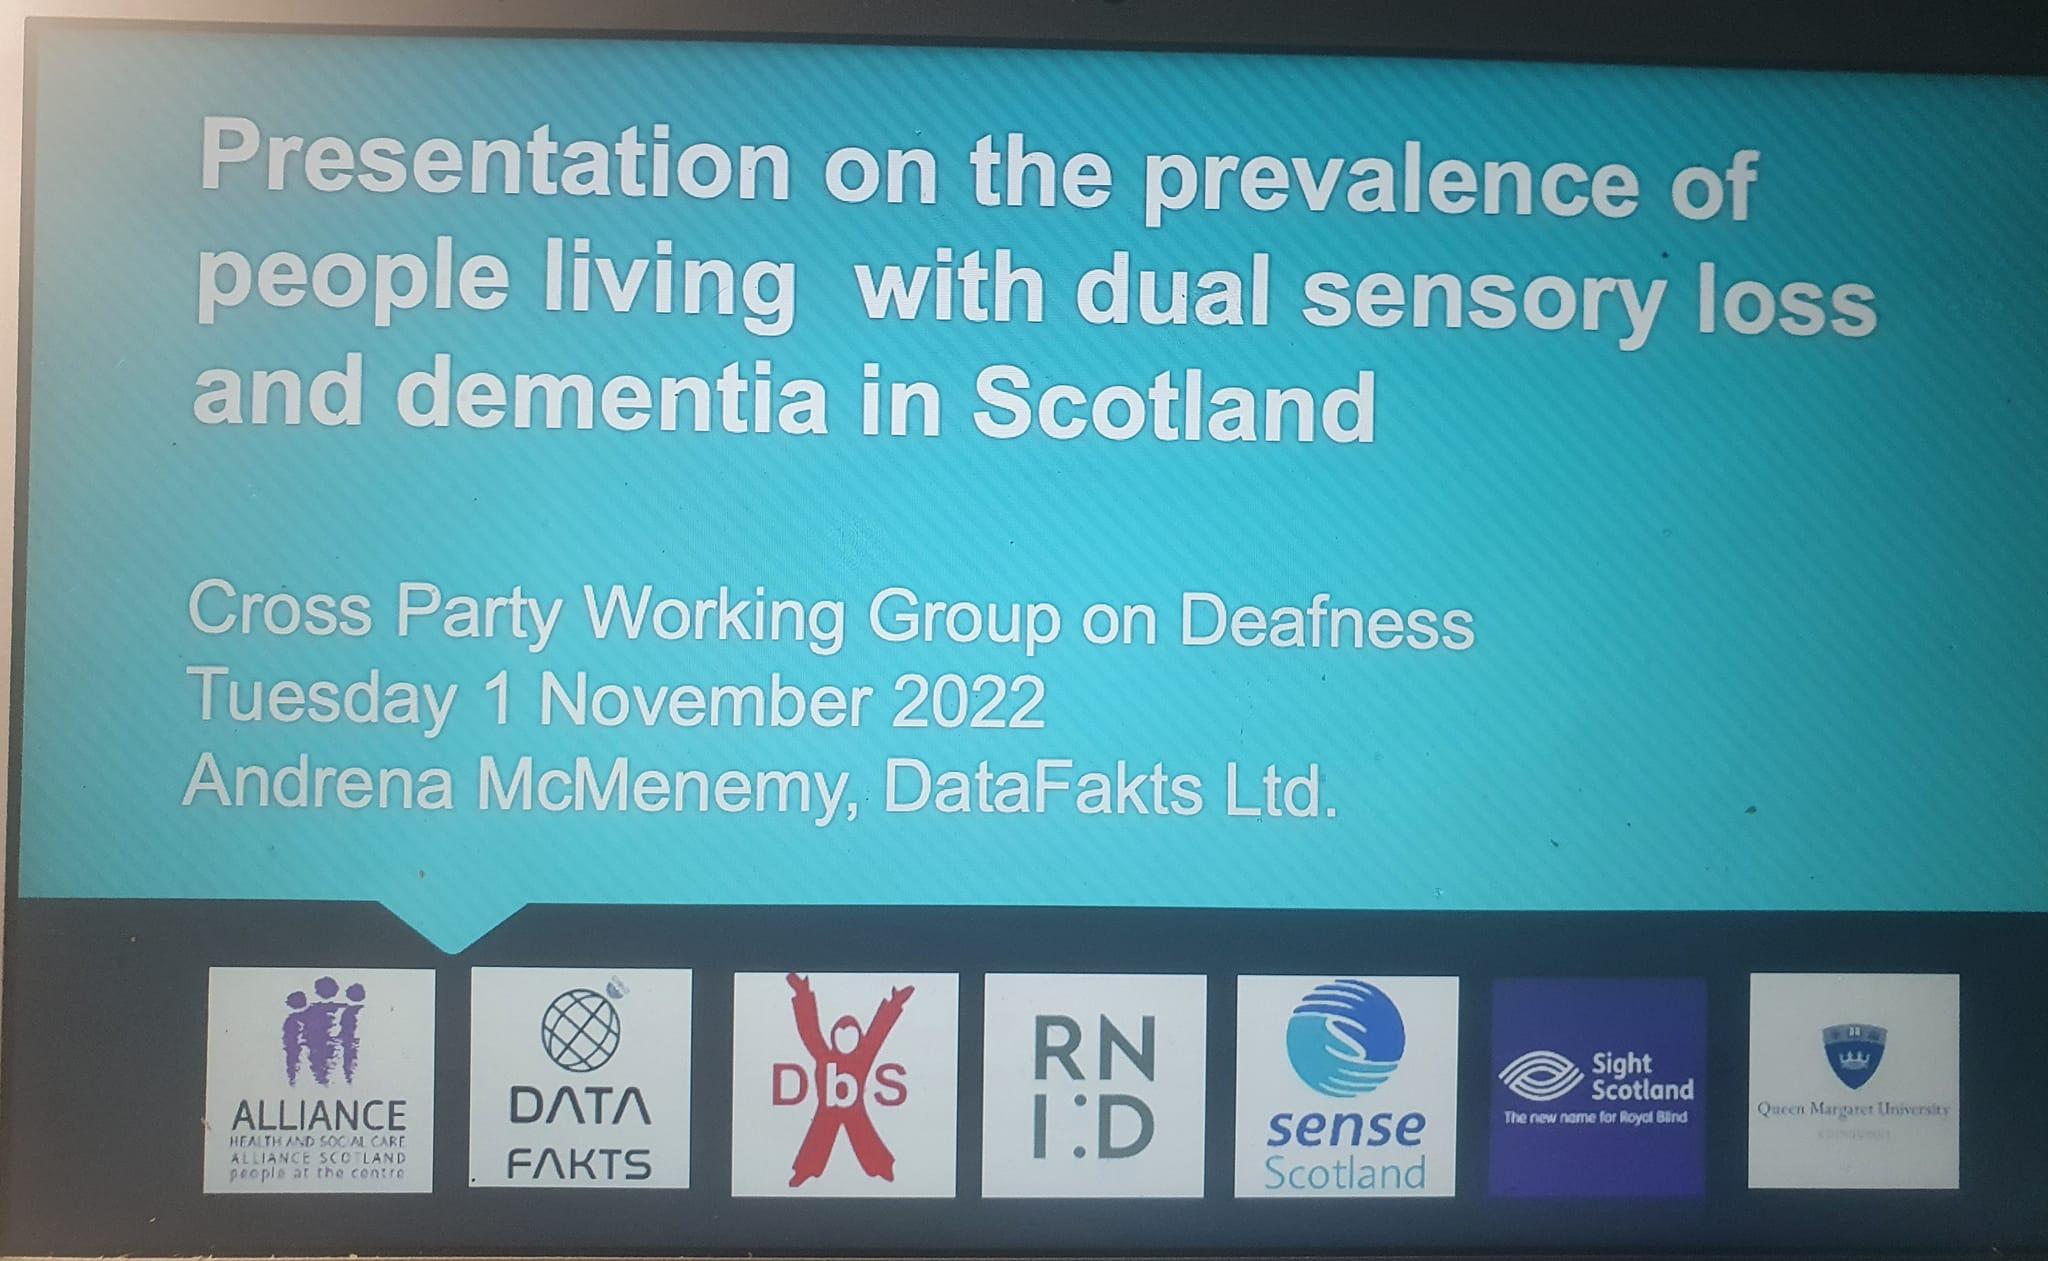 A slide showing the title page of a powerpoint presentation with the title "Presentation on the prevalence of people living with dual sensoey loss and dementia in Scotland" the subheading is Cross Party Working Group on Deafness Tuesday 1 November 2022 Andrena McMenemy, Datafakts Ltd Under this are the logos of the participating organisations The Health and Social Care Alliance Datafakts, deafblind Scotland, RNID, Sense Scotland, Sight Scotland, Queen Margaret University